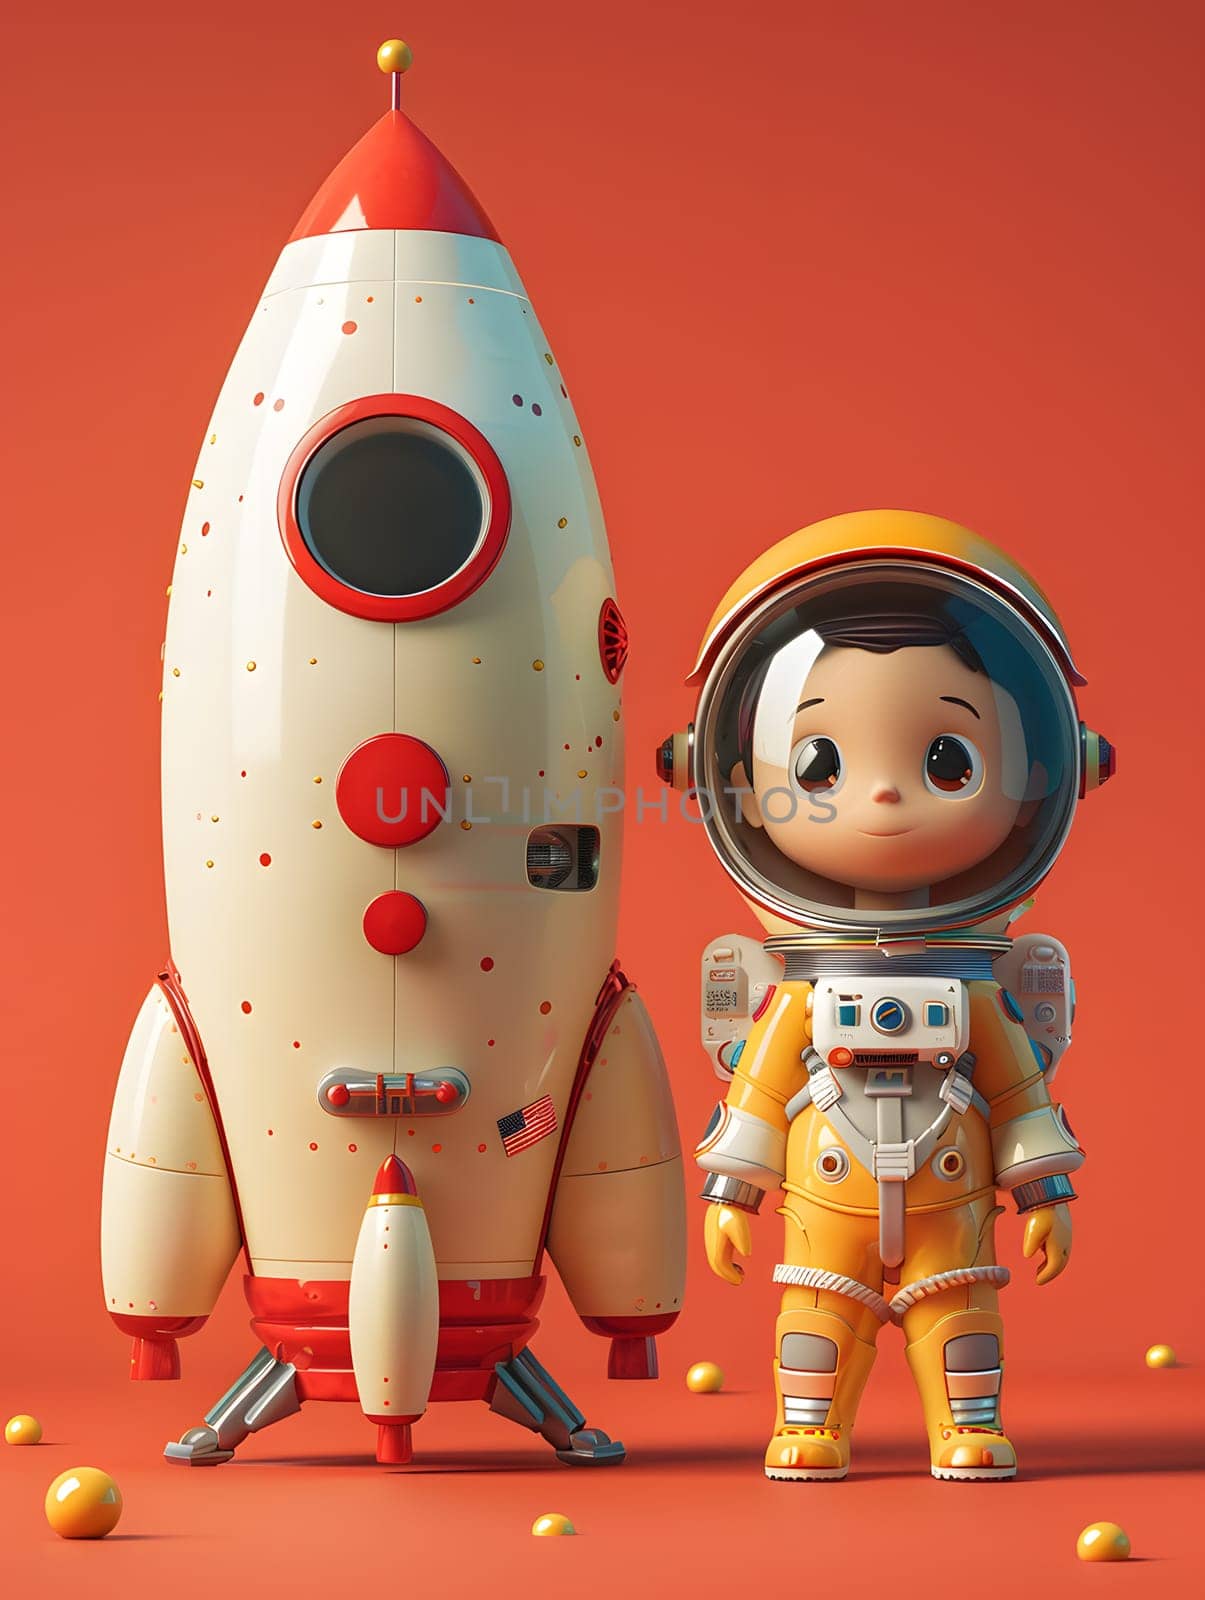 A toy astronaut is next to a toy rocket figurine at the event by Nadtochiy